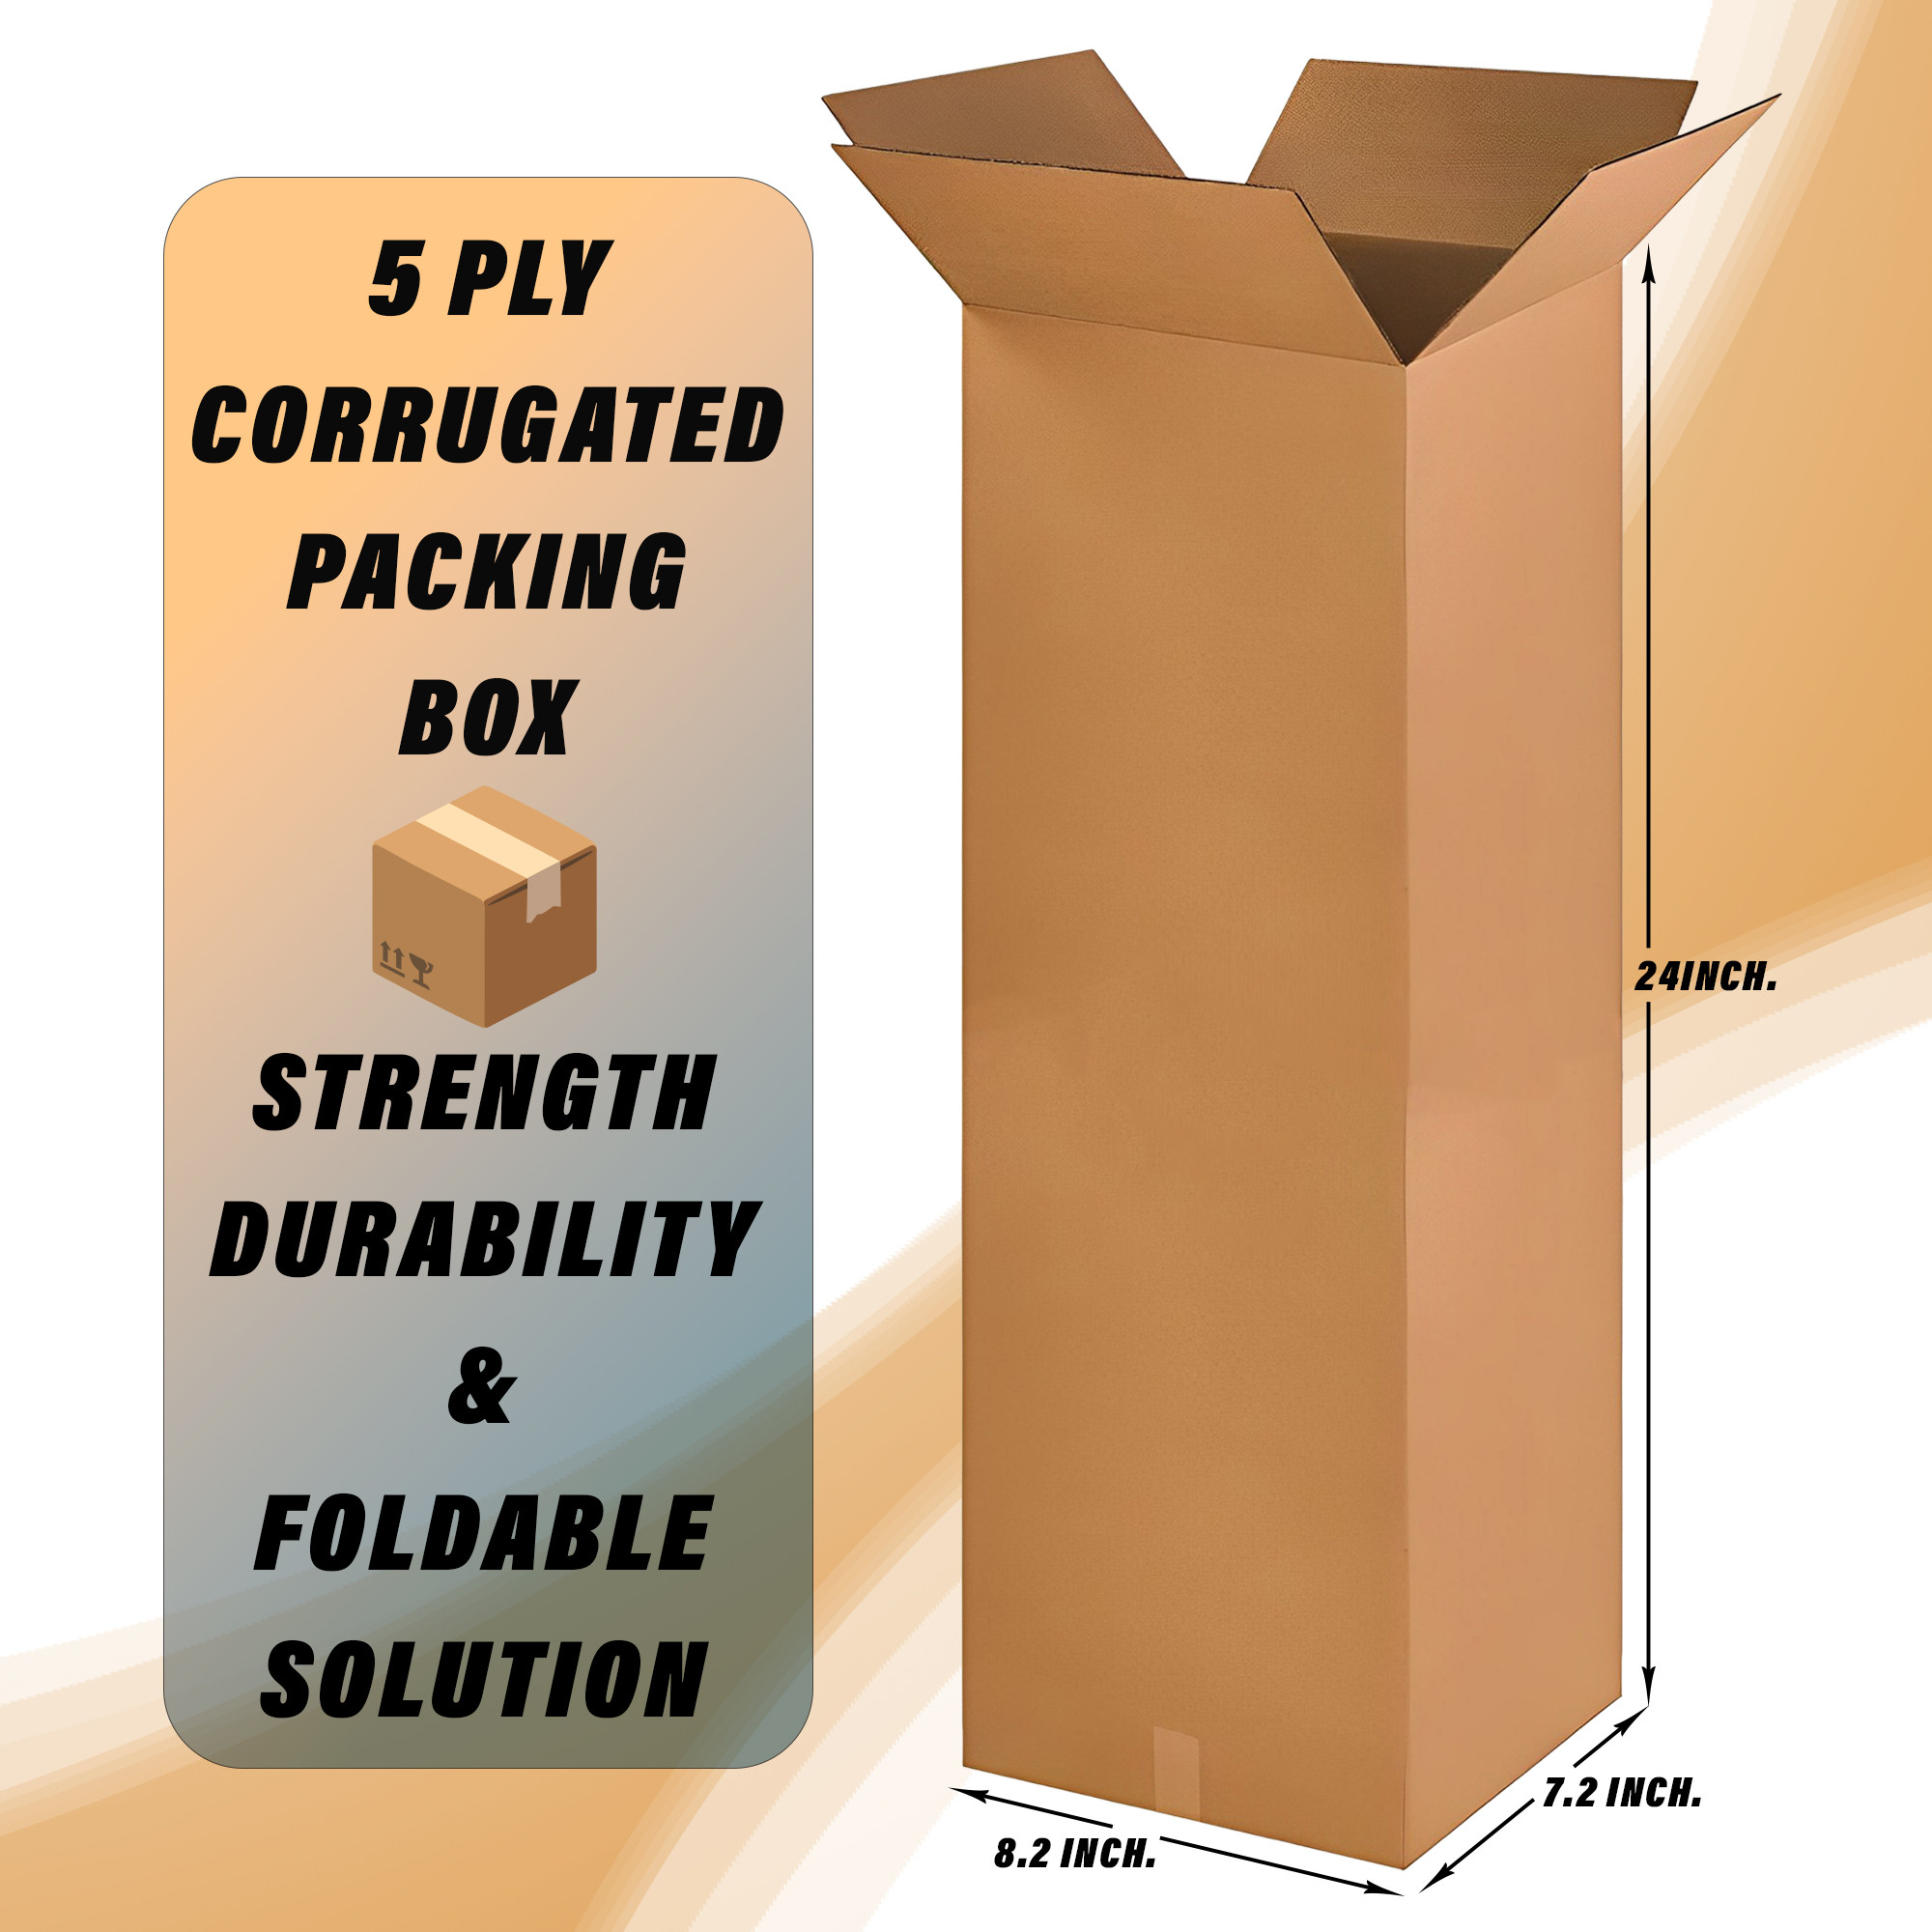 Kuber Industries Corrugated Box | 5 Ply Corrugated Packing Box | Corrugated for Shipping | Corrugated for Courier & Goods Transportation | L 8.2 x W 7.2 x H 24 Inch| Brown